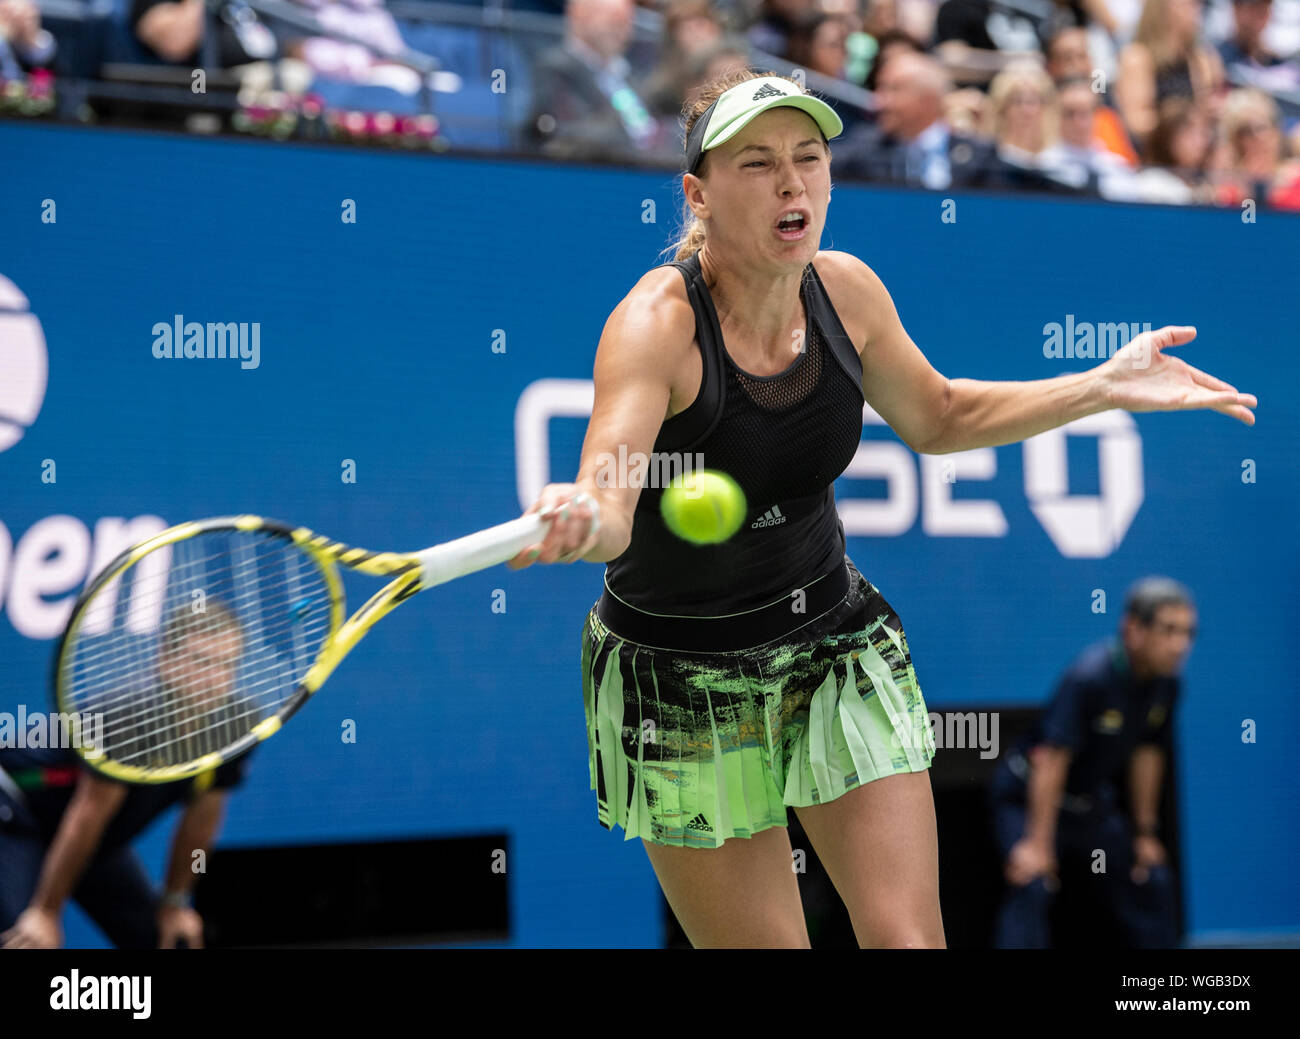 New York, USA. 31st Aug, 2019. August 31, 2019: Caroline Wozniacki (DEN)  loses to Bianca Andreescu (CAN) 6-4, at the US Open being played at Billie  Jean King National Tennis Center in